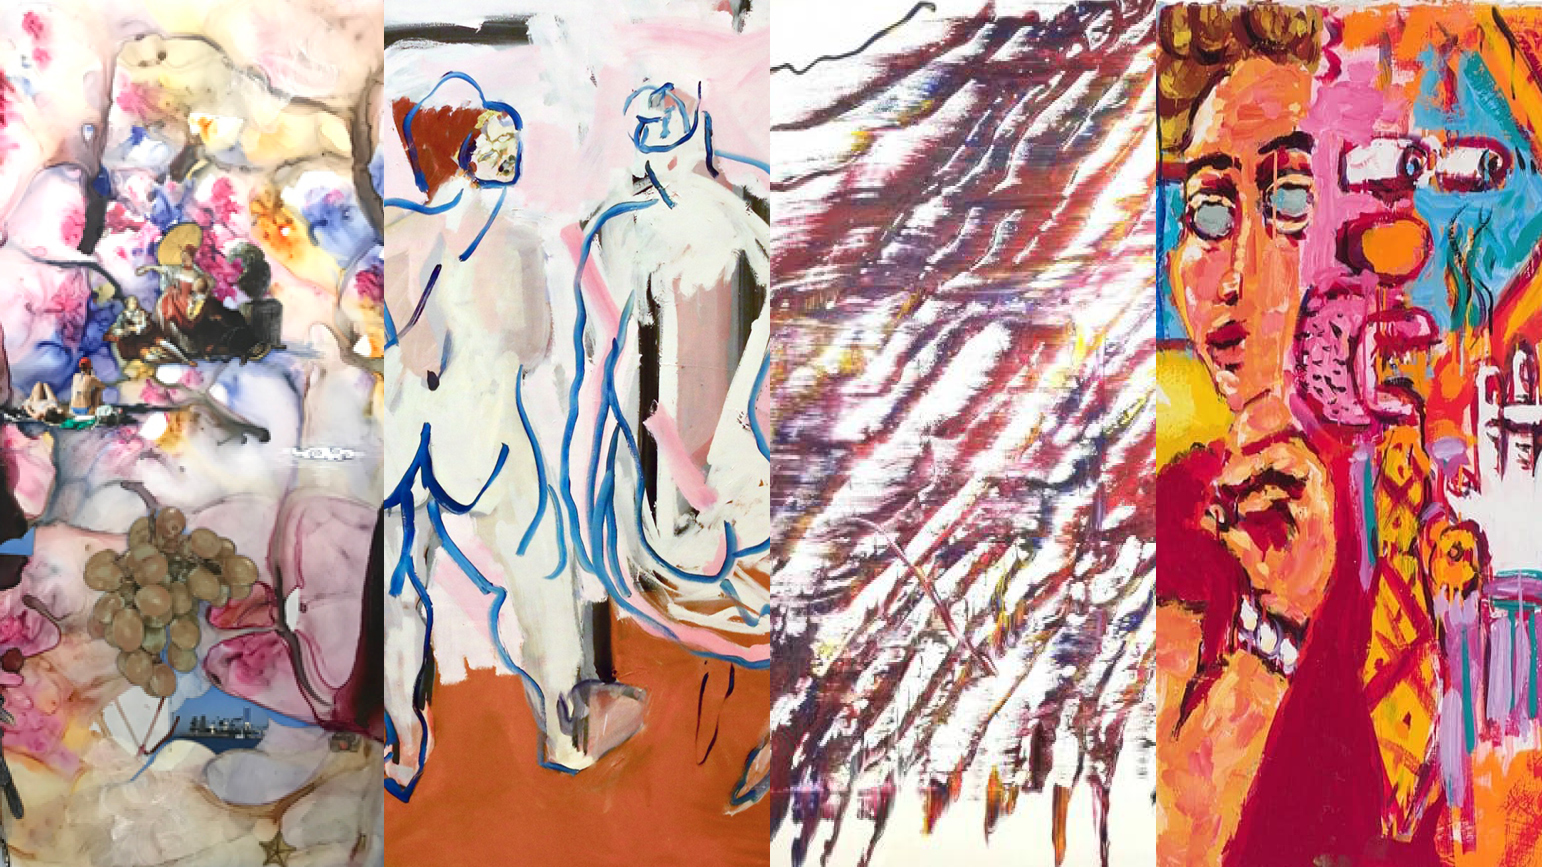 Four images of abstract paintings